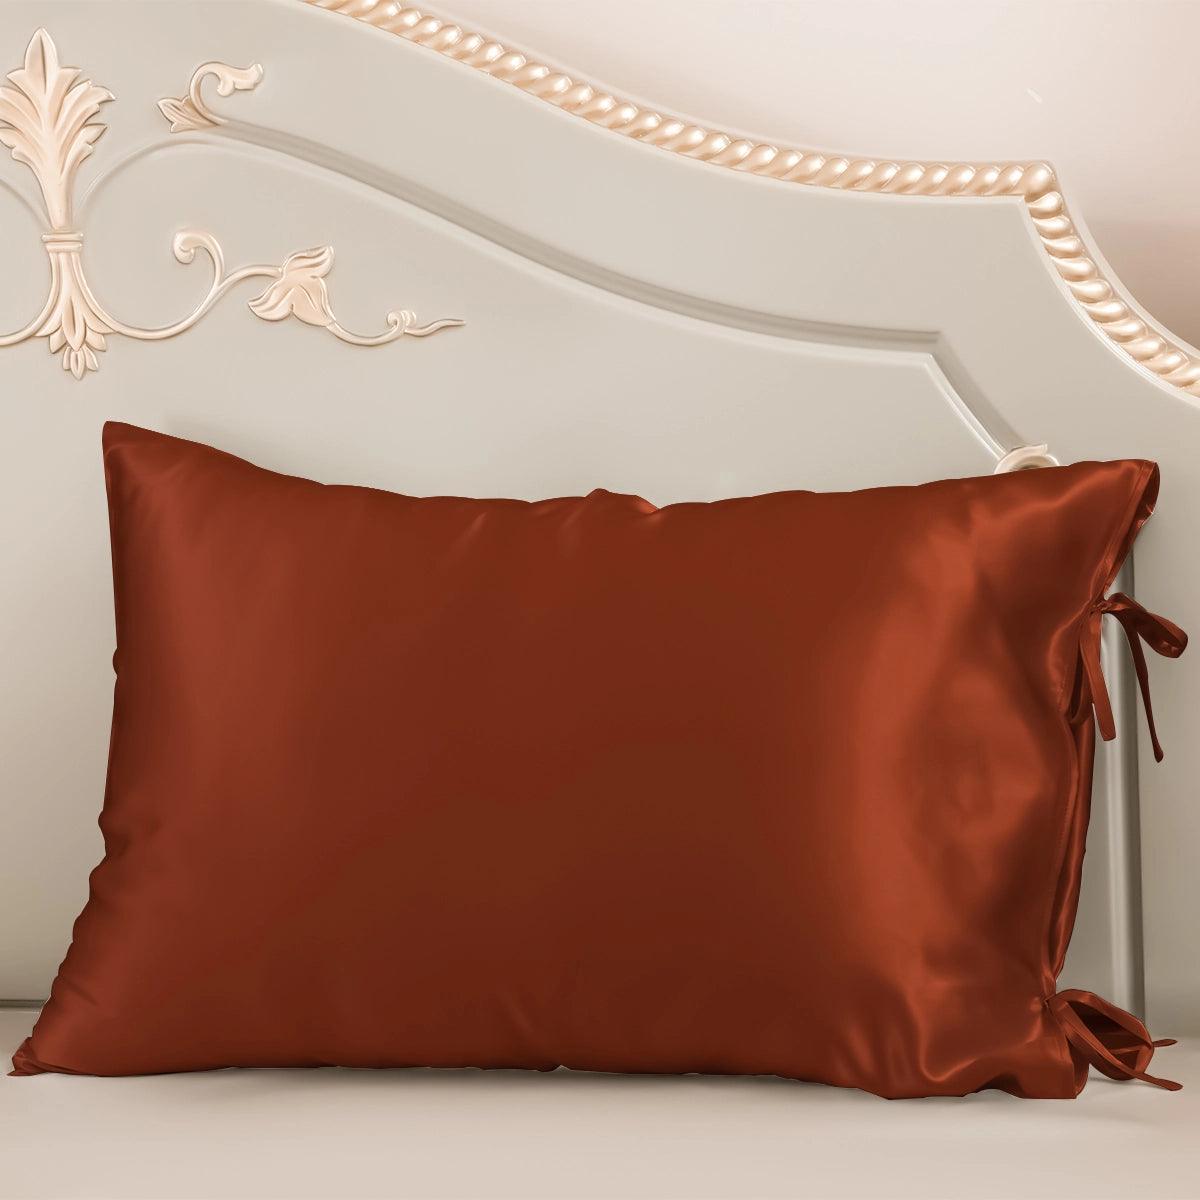 23 mm 6A+ Silk Pillowcase With Envelope With Laundry Bag - promeedsilk